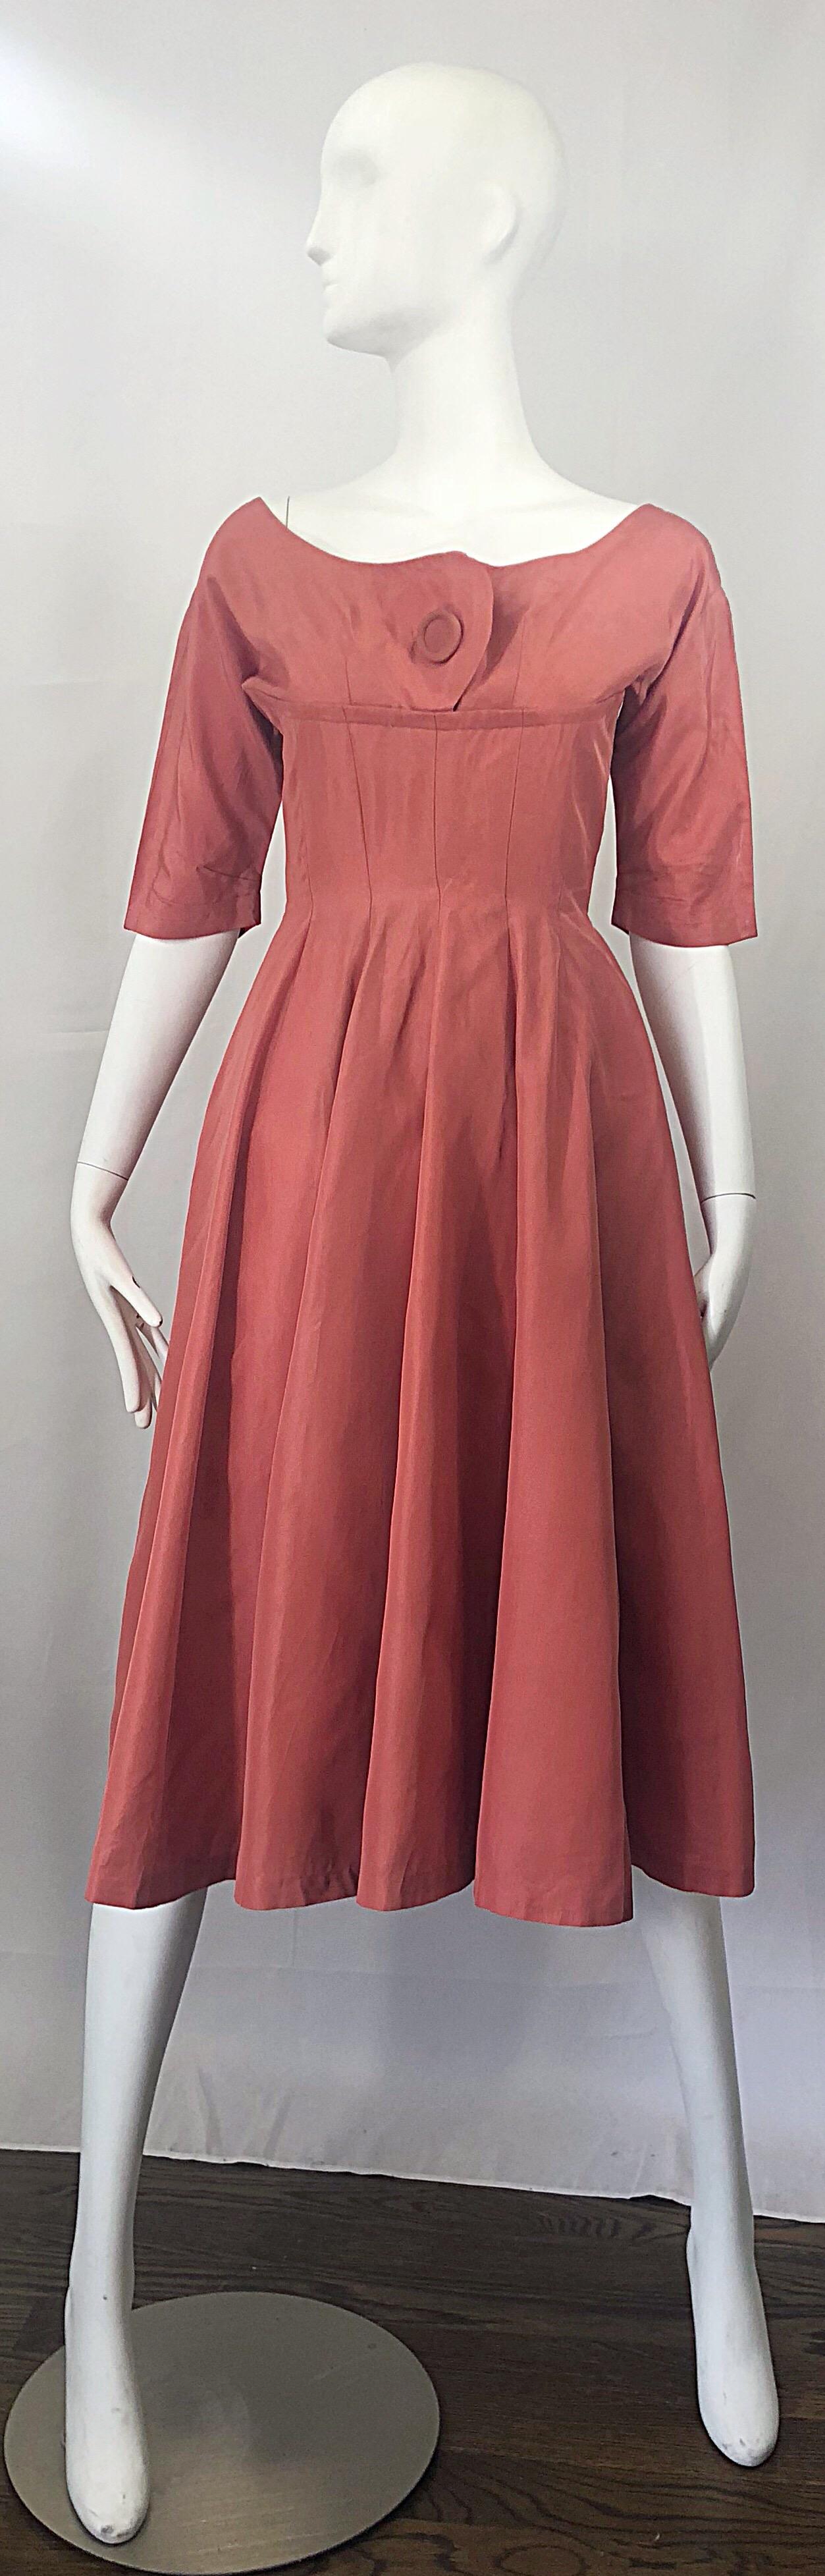 Beautiful 1950s GIG YOUNG salmon / coral pink silk taffeta fit n' flare 3/4 sleeves dress! Features a wonderful flattering tailored bodice with a forgiving full skirt, which could also accomodate a crinoline for extra fullness. Perfect 3/4 sleeve